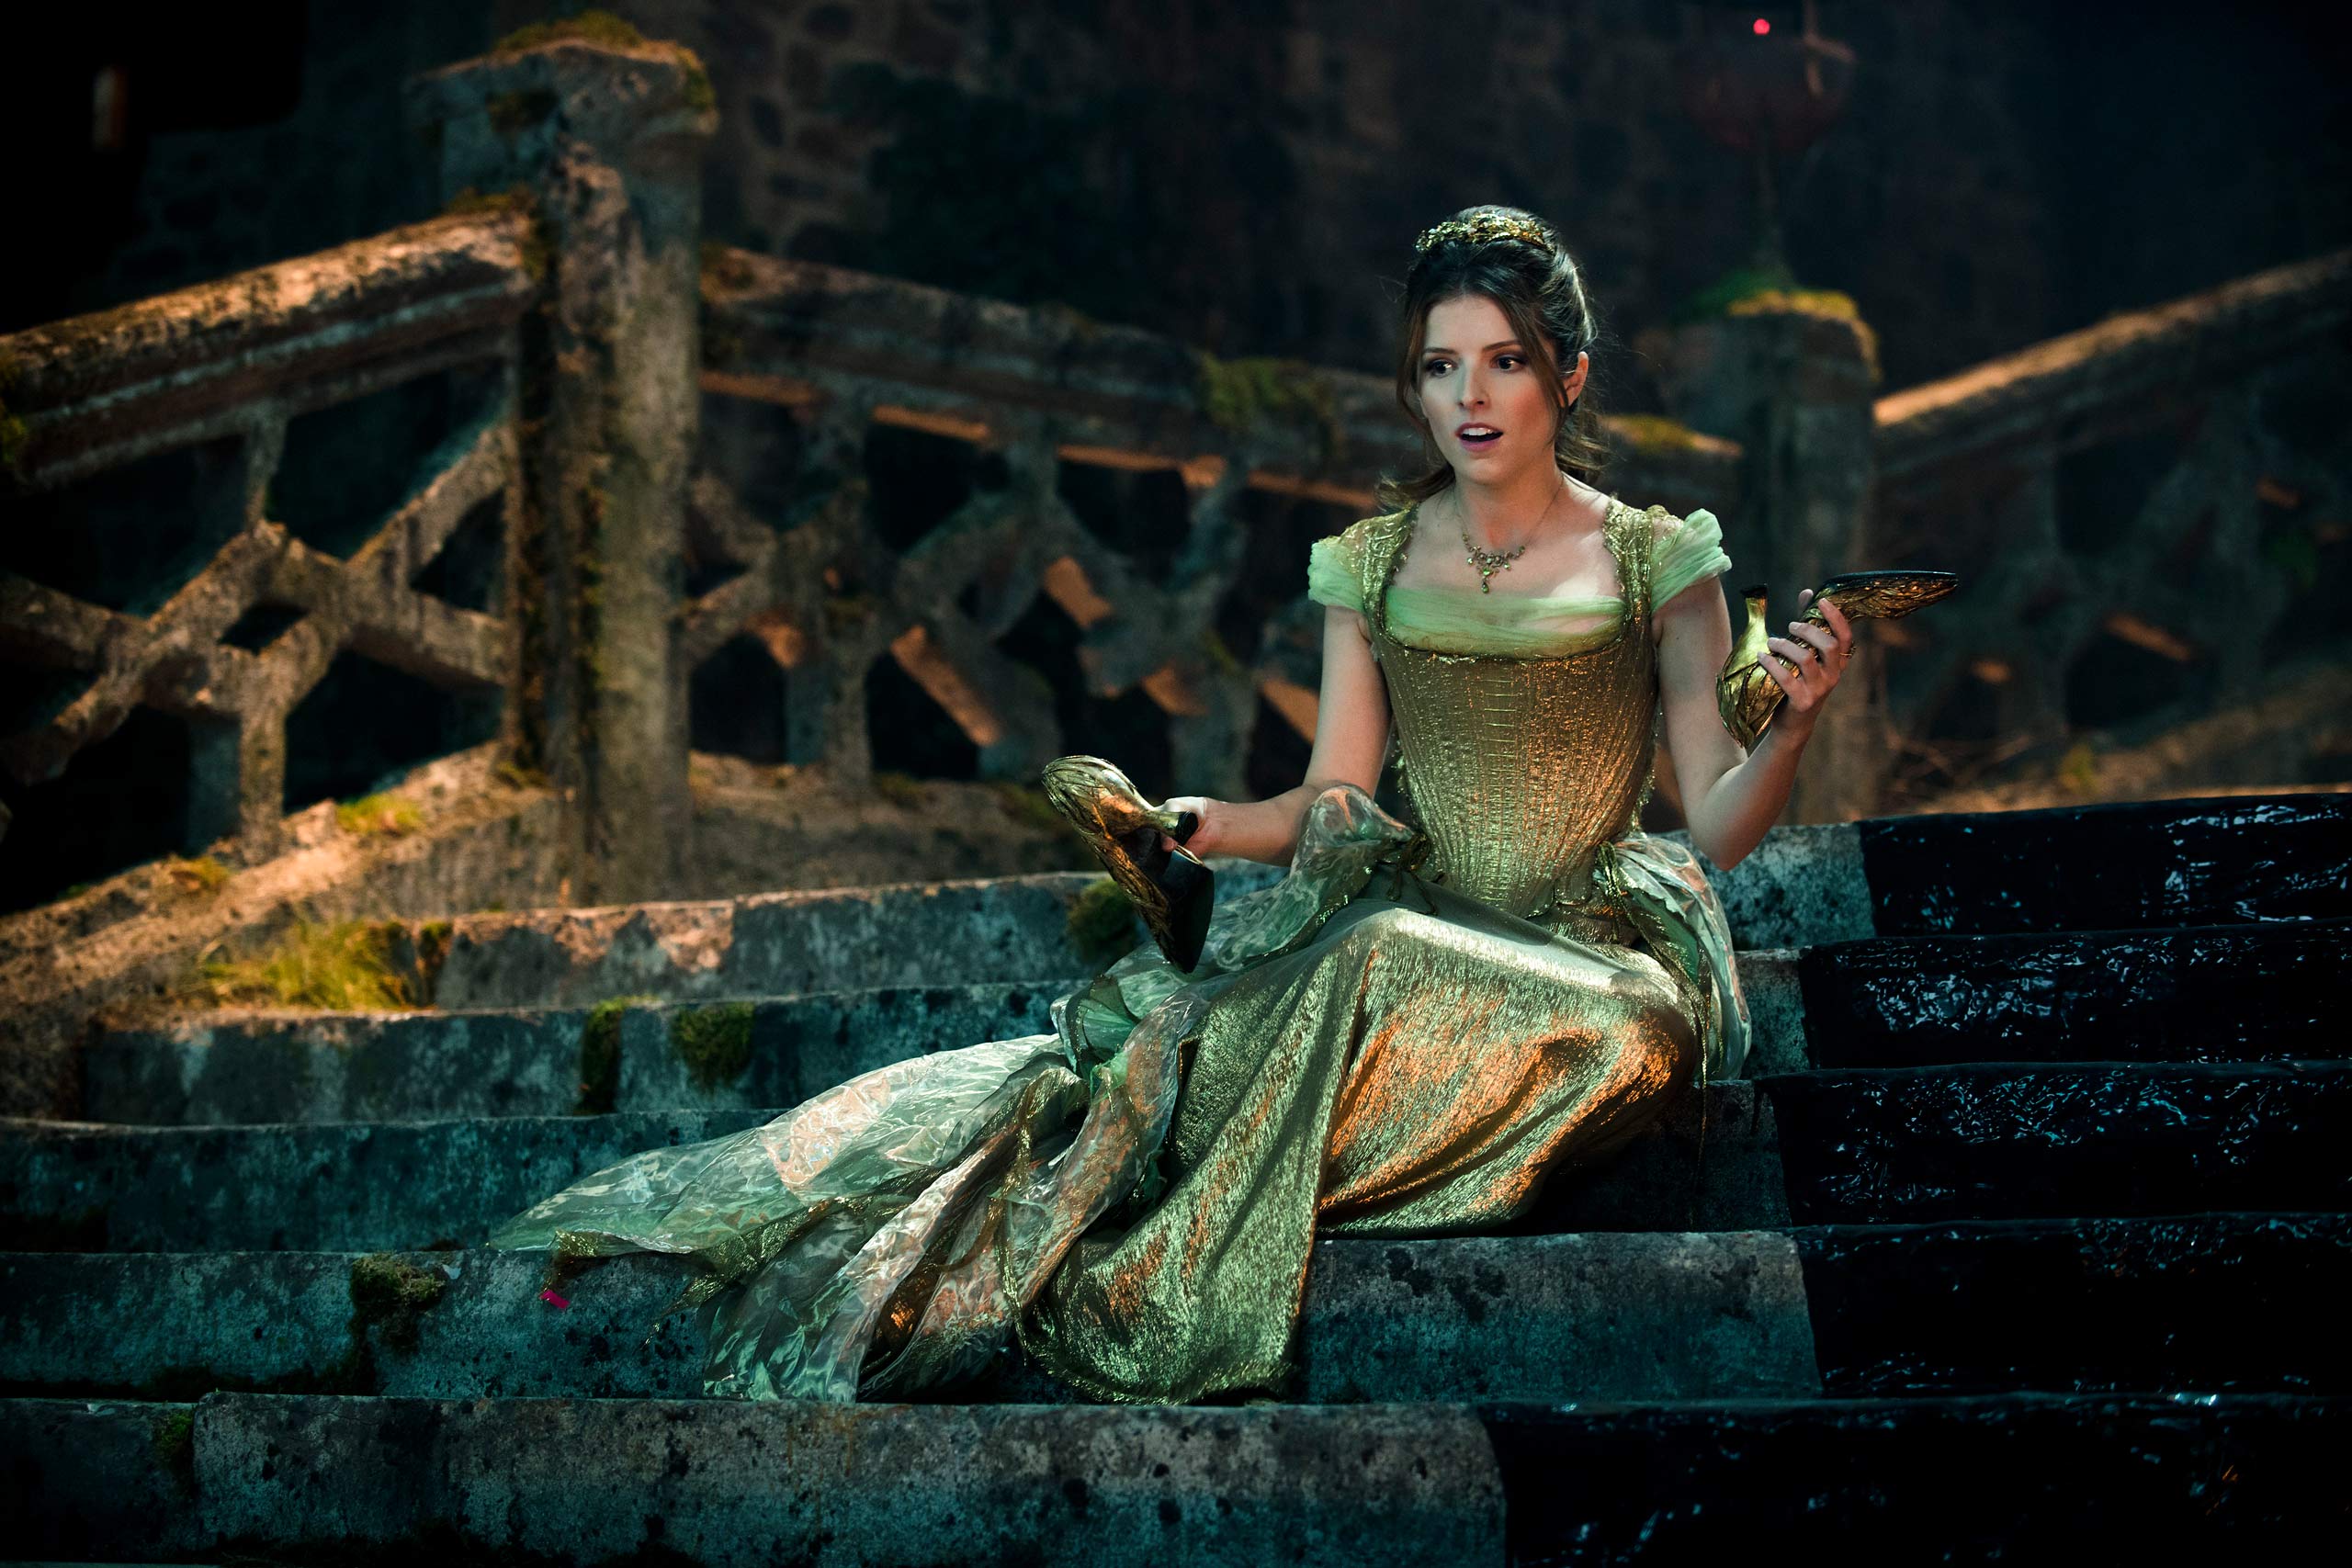 Into the Woods (Best Motion Picture - Comedy or Musical)